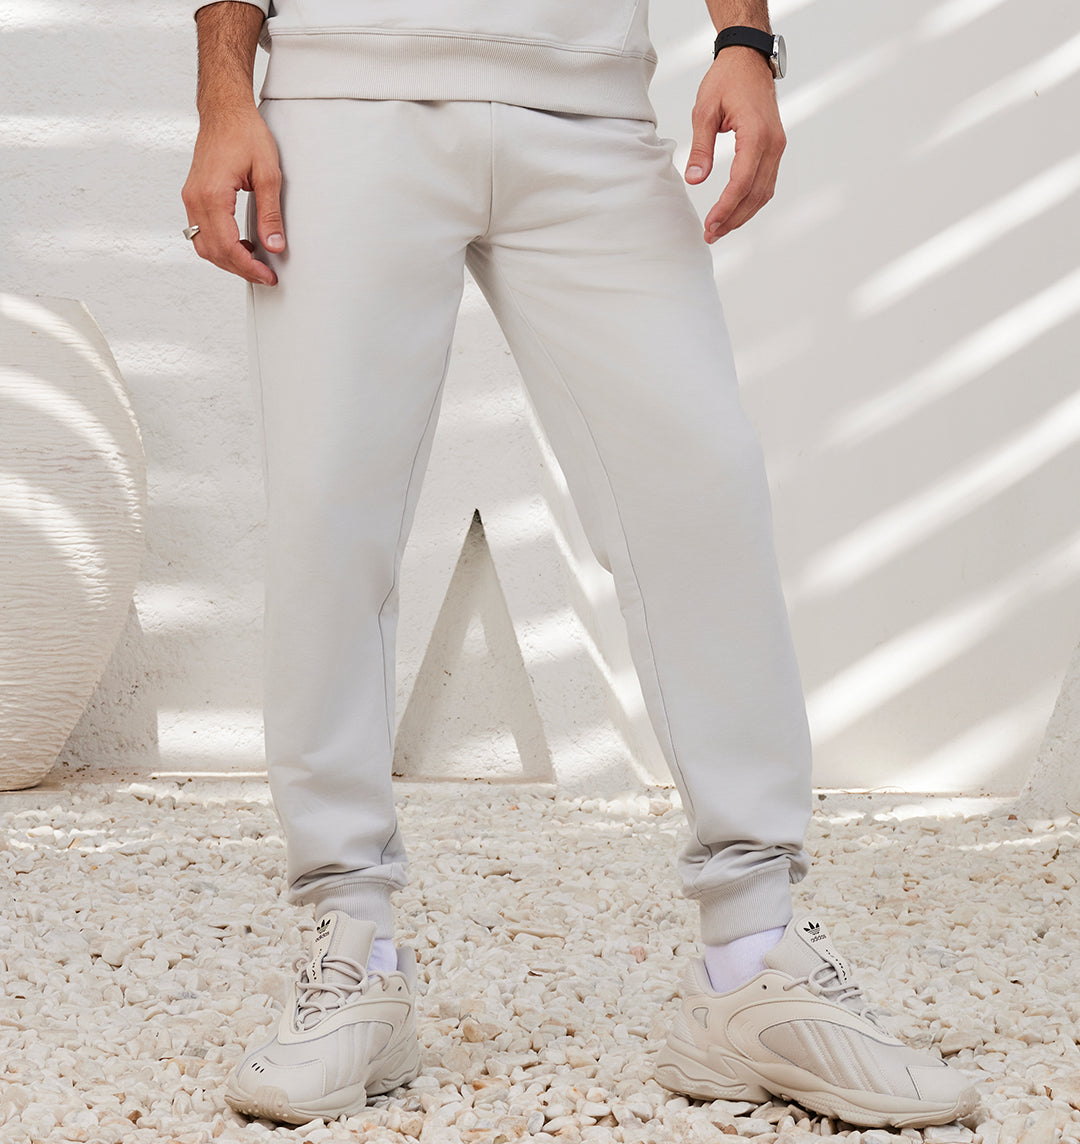 Joggers For Every Mood: From Lounge To Street